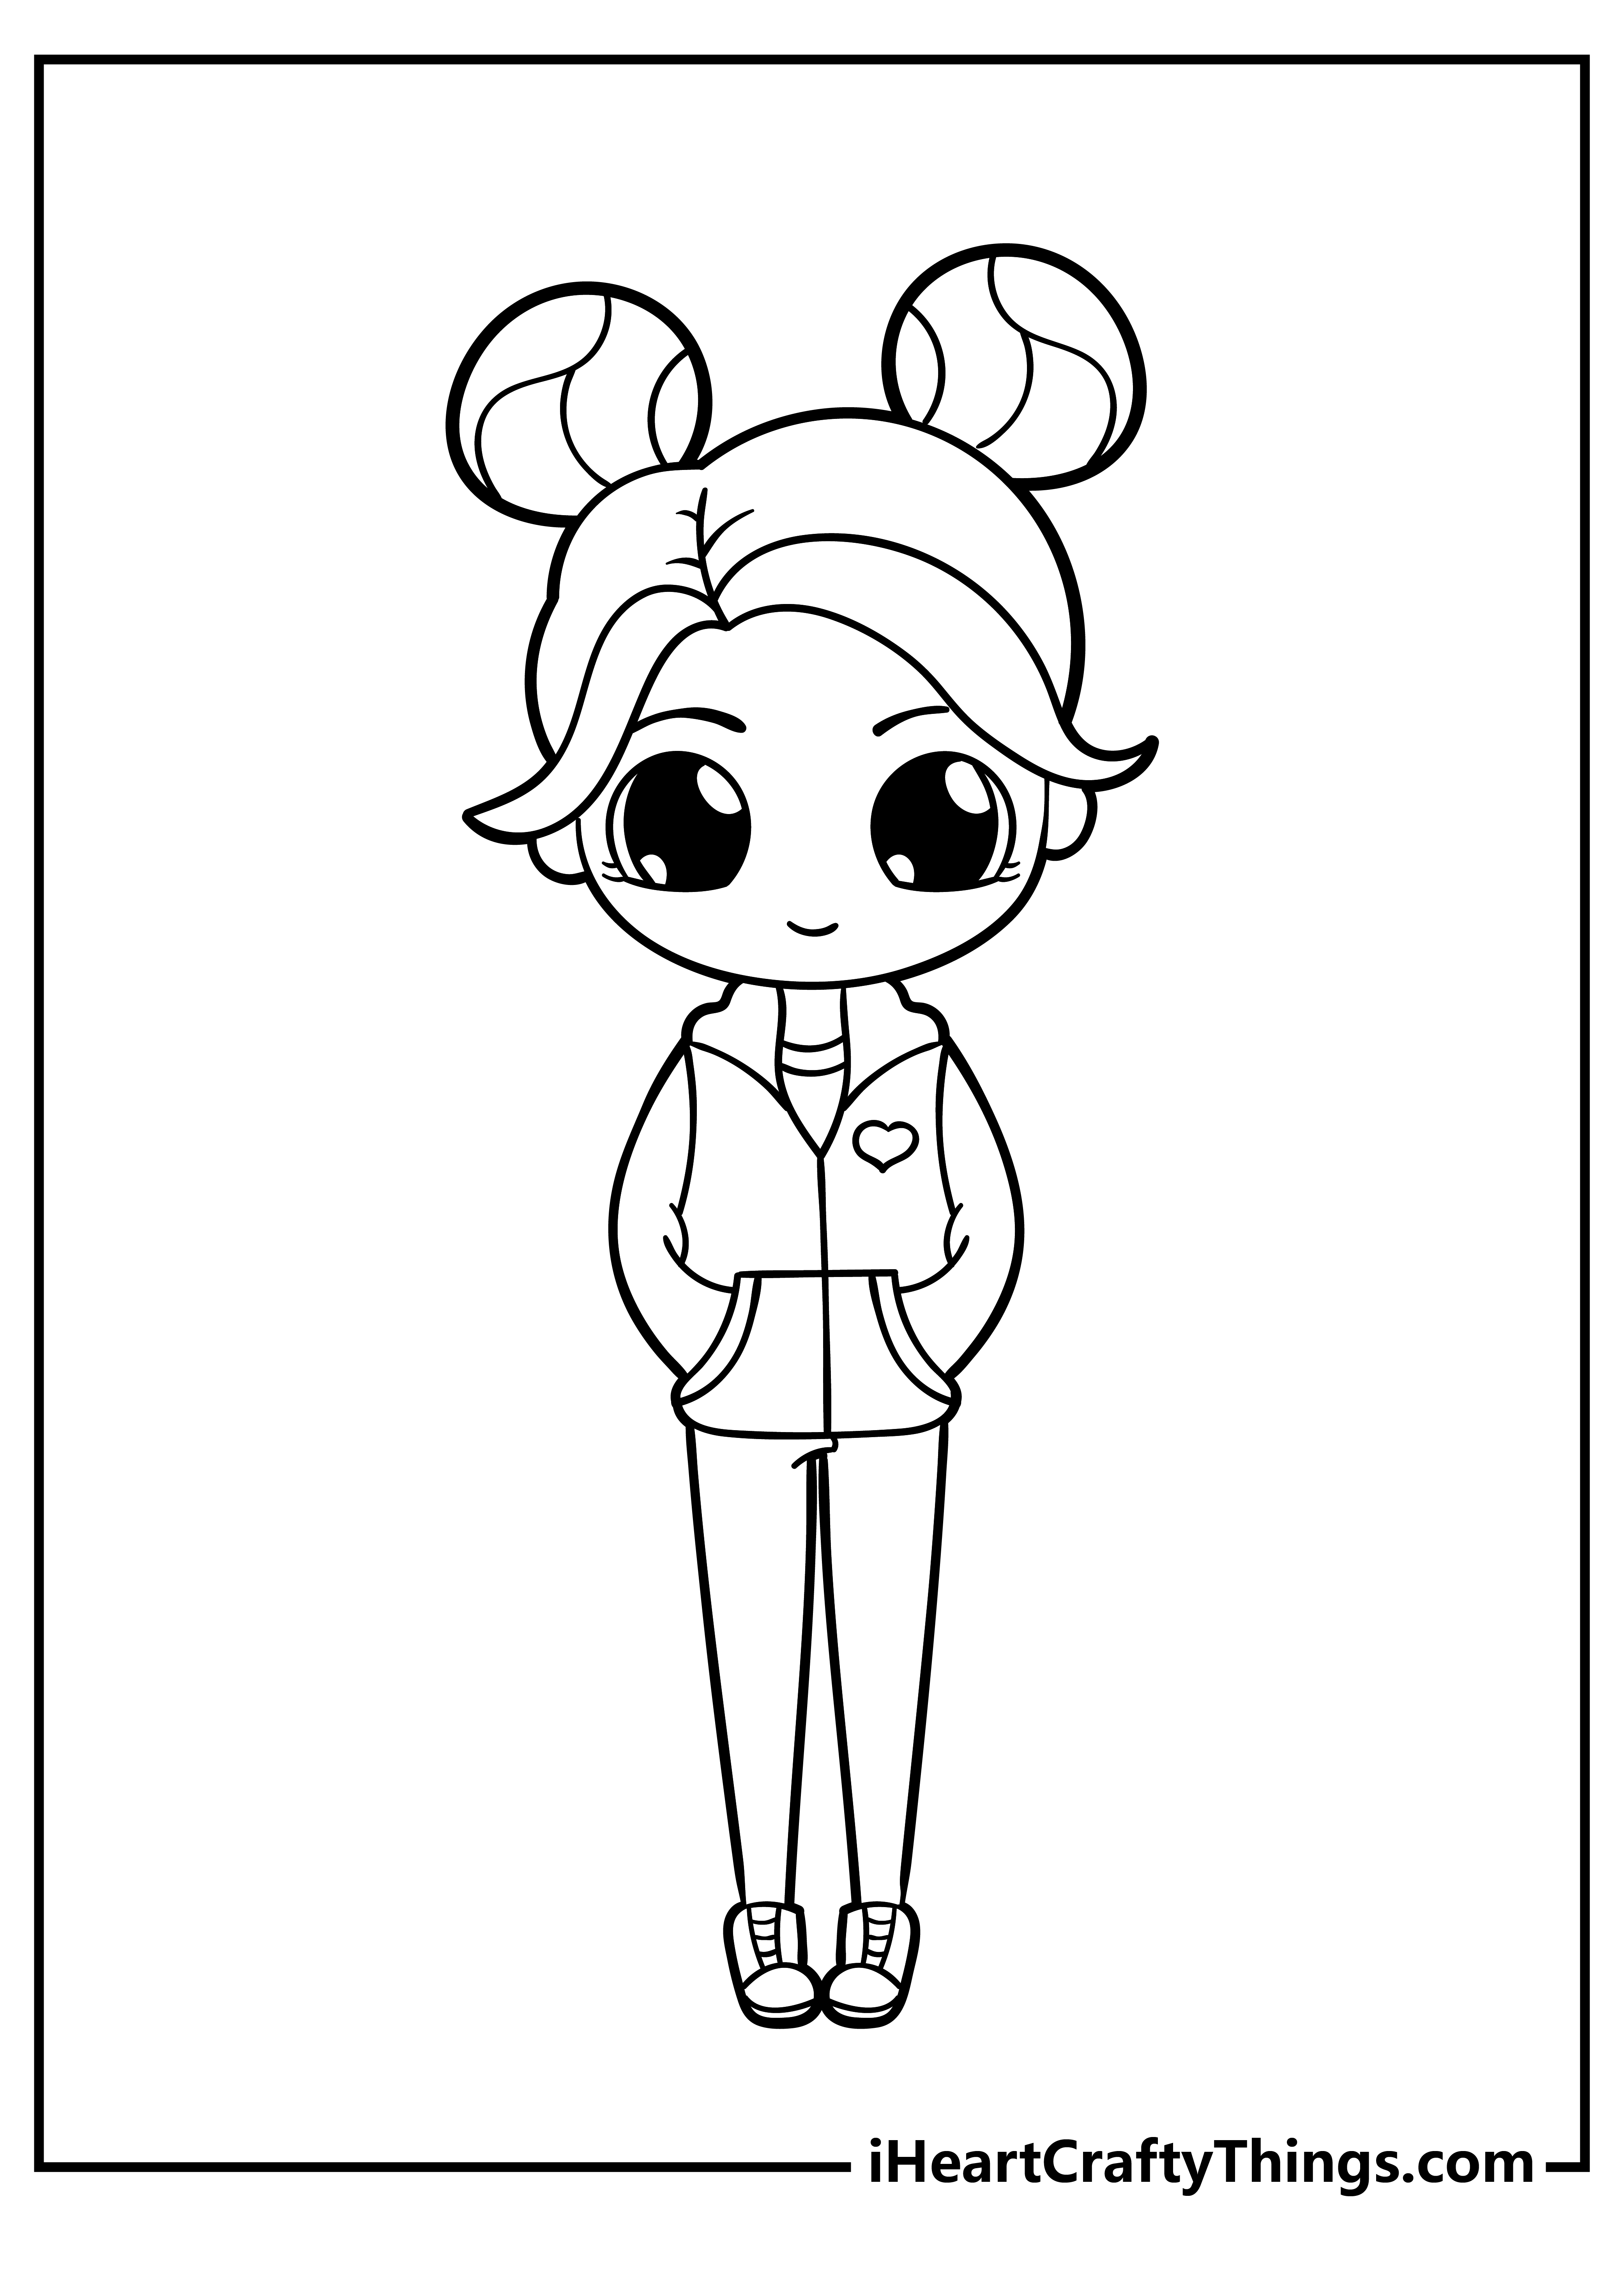 Cute Coloring Pages For Girls free printable